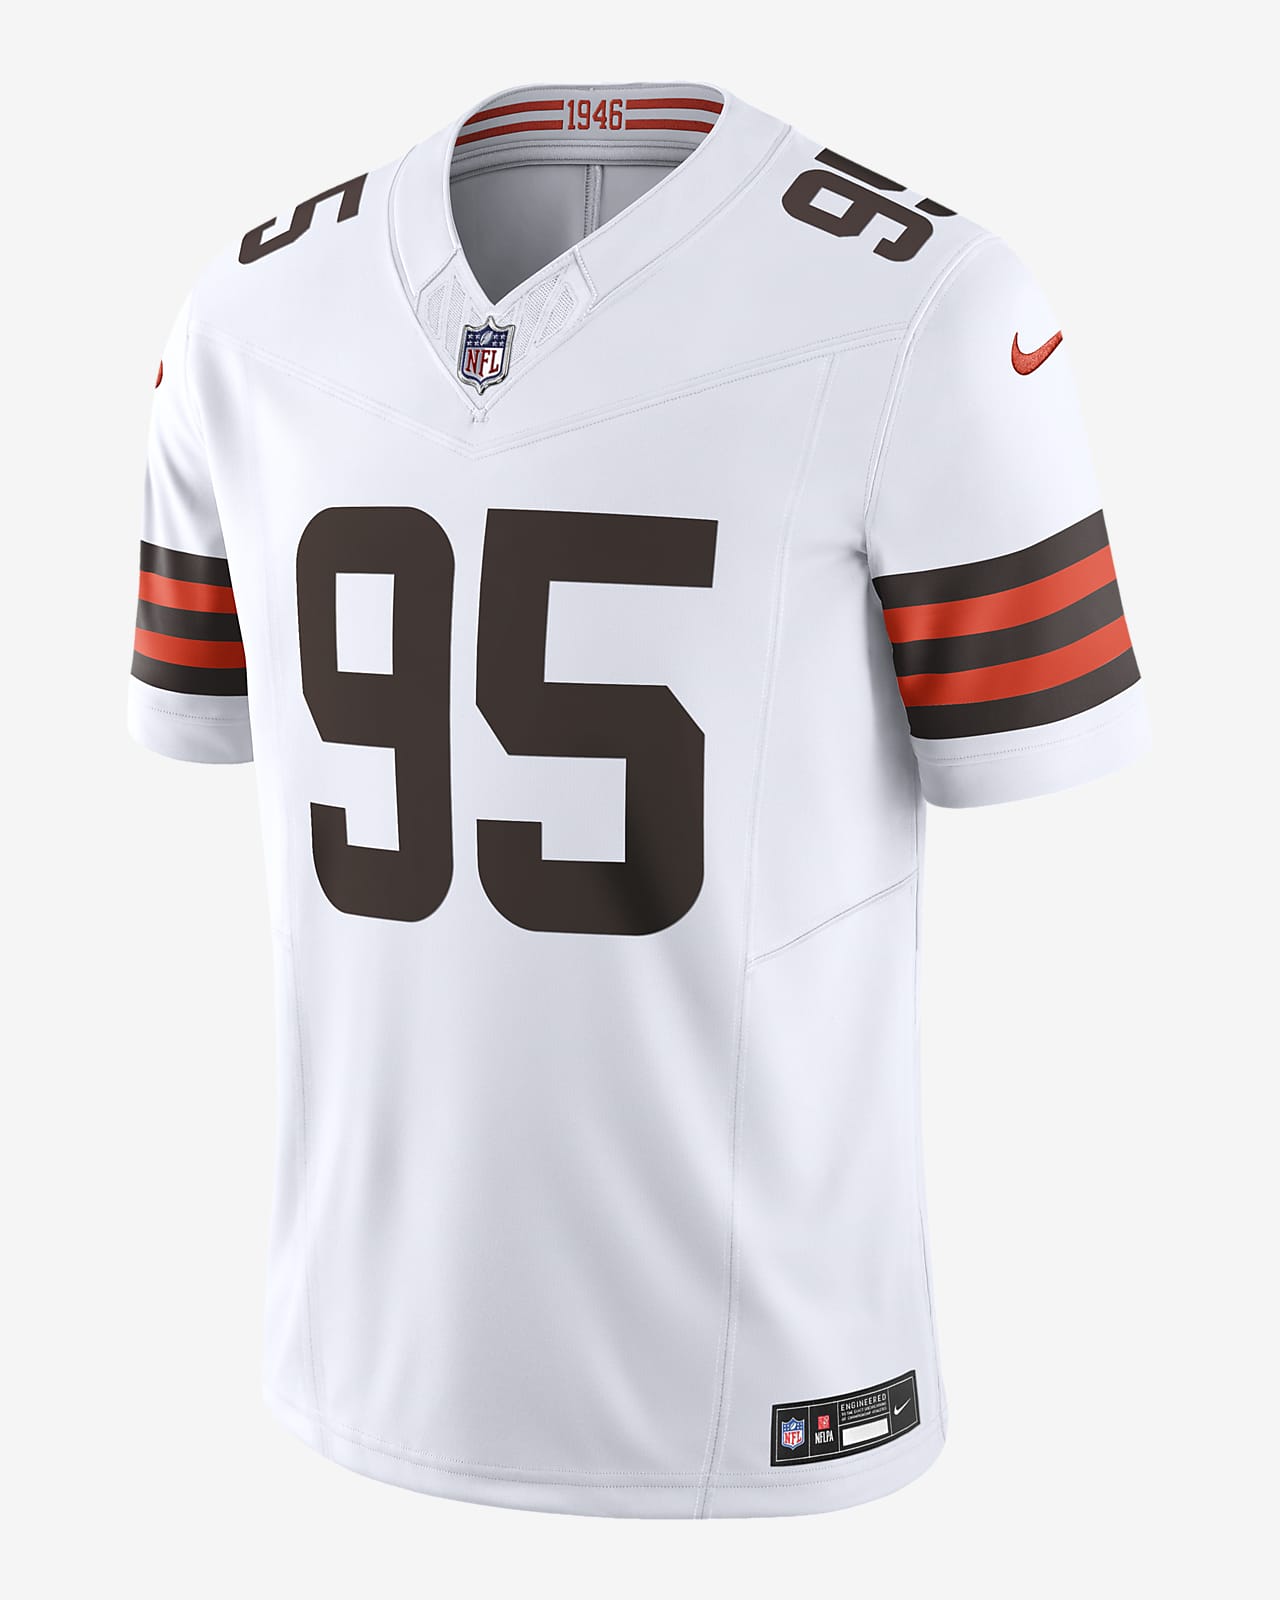 big and tall cleveland browns apparel